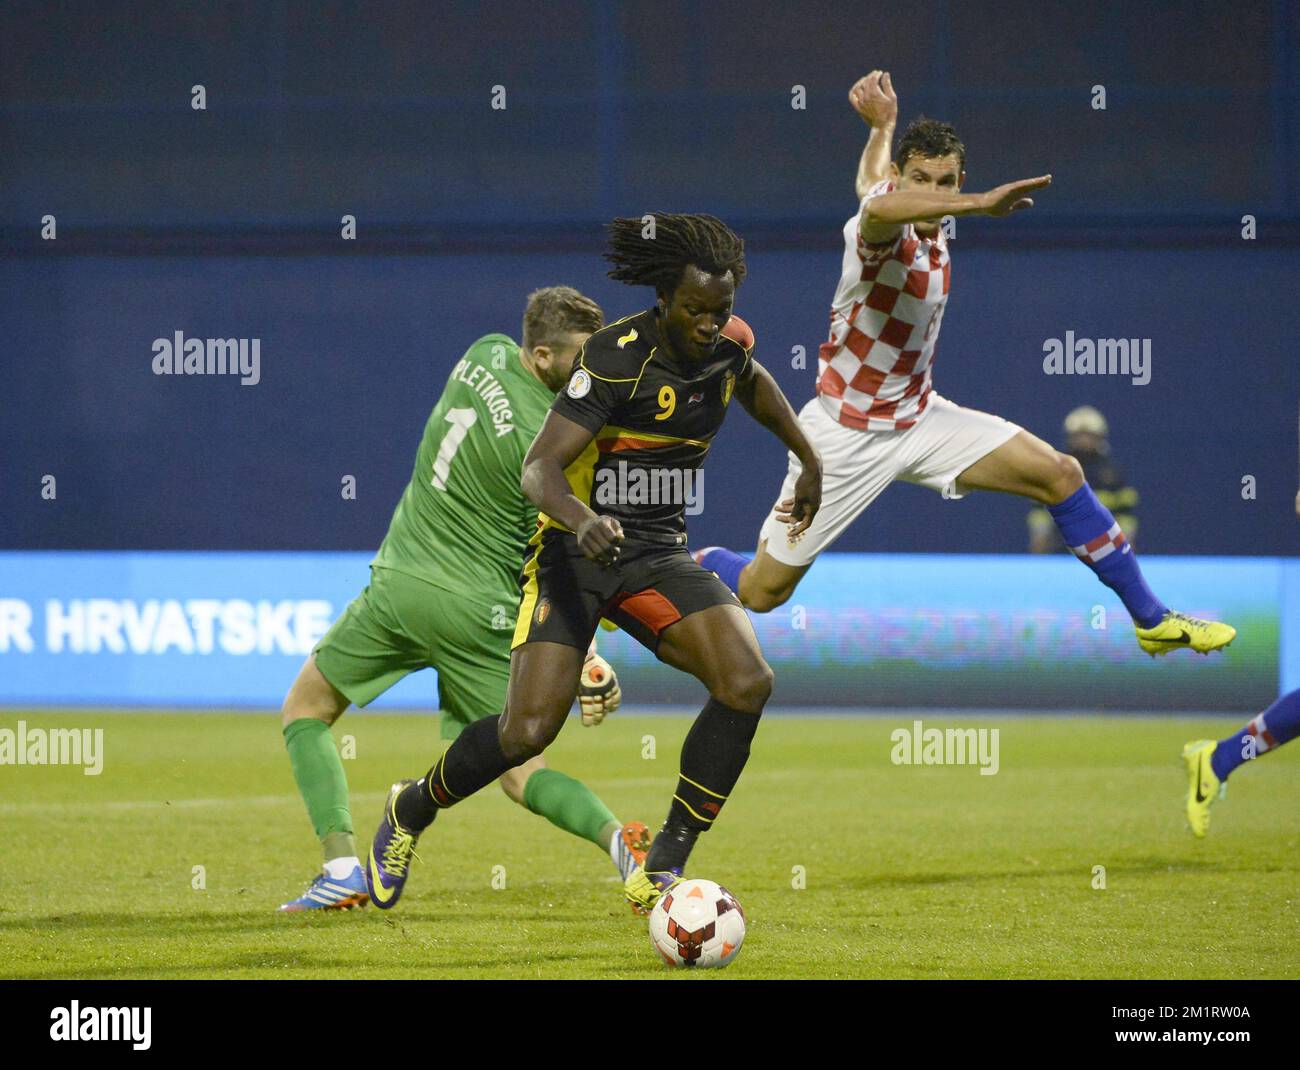 20131011 - ZAGREB, CROATIA: Belgium's Romelu Lukaku passes Croatia's goalkeeper Stipe Pletikosa and scores the 0-1 goal during a soccer game between Belgian national team The Red Devils and the Croatian national team in the Maksimir stadium in Zagreb, Croatia, Friday 11 October 2013, a qualification game for the 2014 FIFA World Cup. With two games to play the Red Devils are leading group A, they need one more point to qualify for the World Cup as group winner. BELGA PHOTO DIRK WAEM Stock Photo